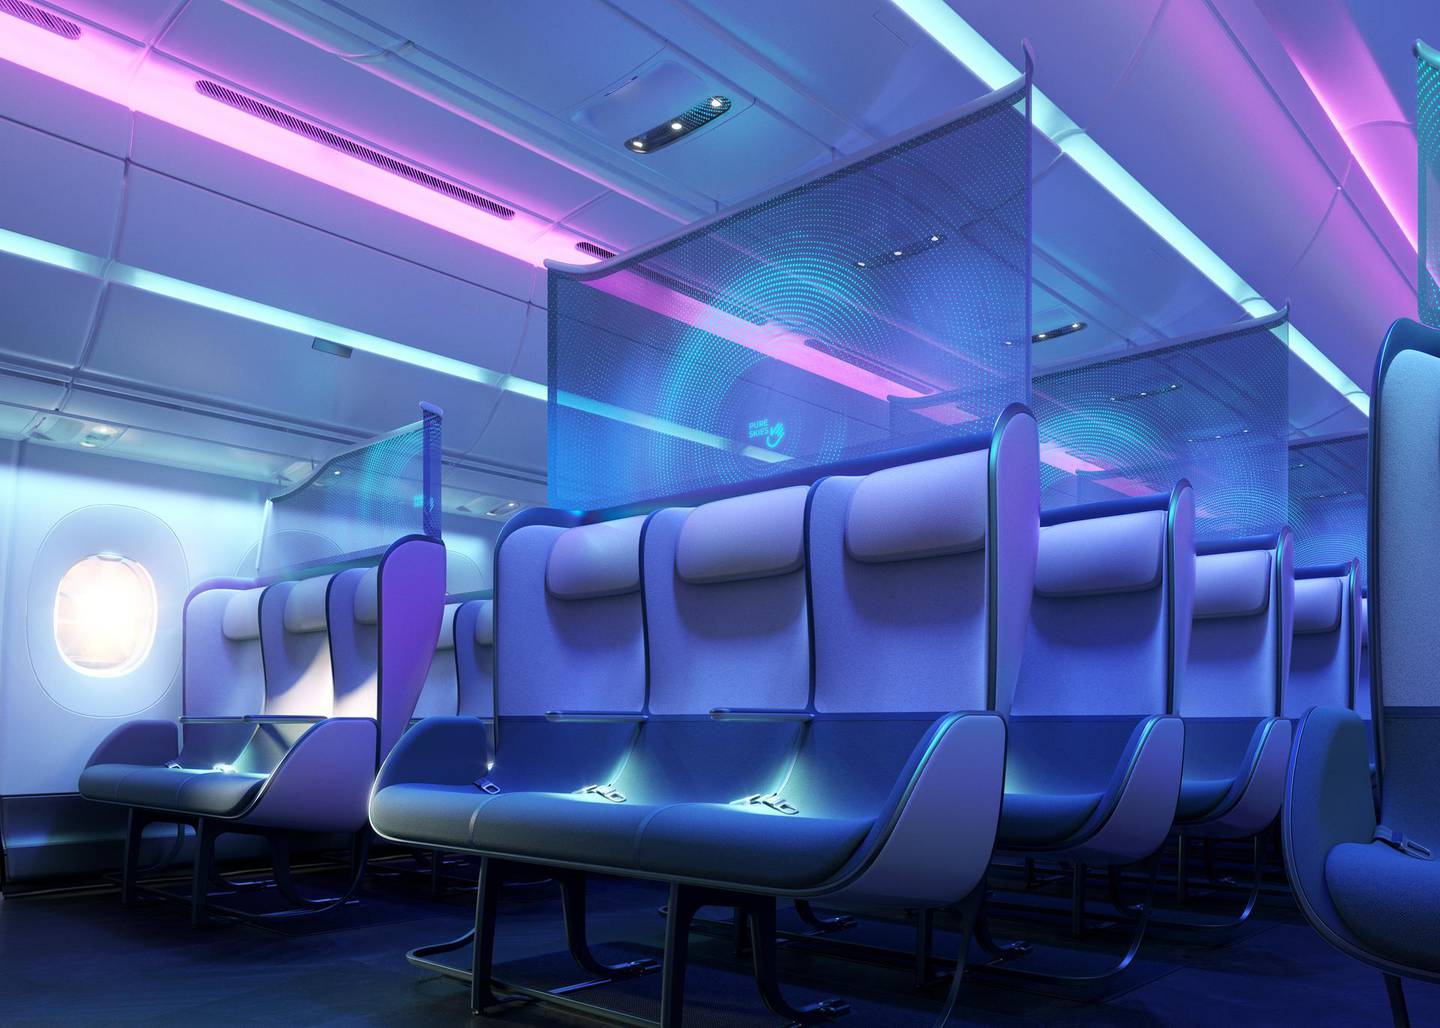 Purple lighting helps facilitate the transition between boarding and in-flight mode. Courtesy PriestmanGoode